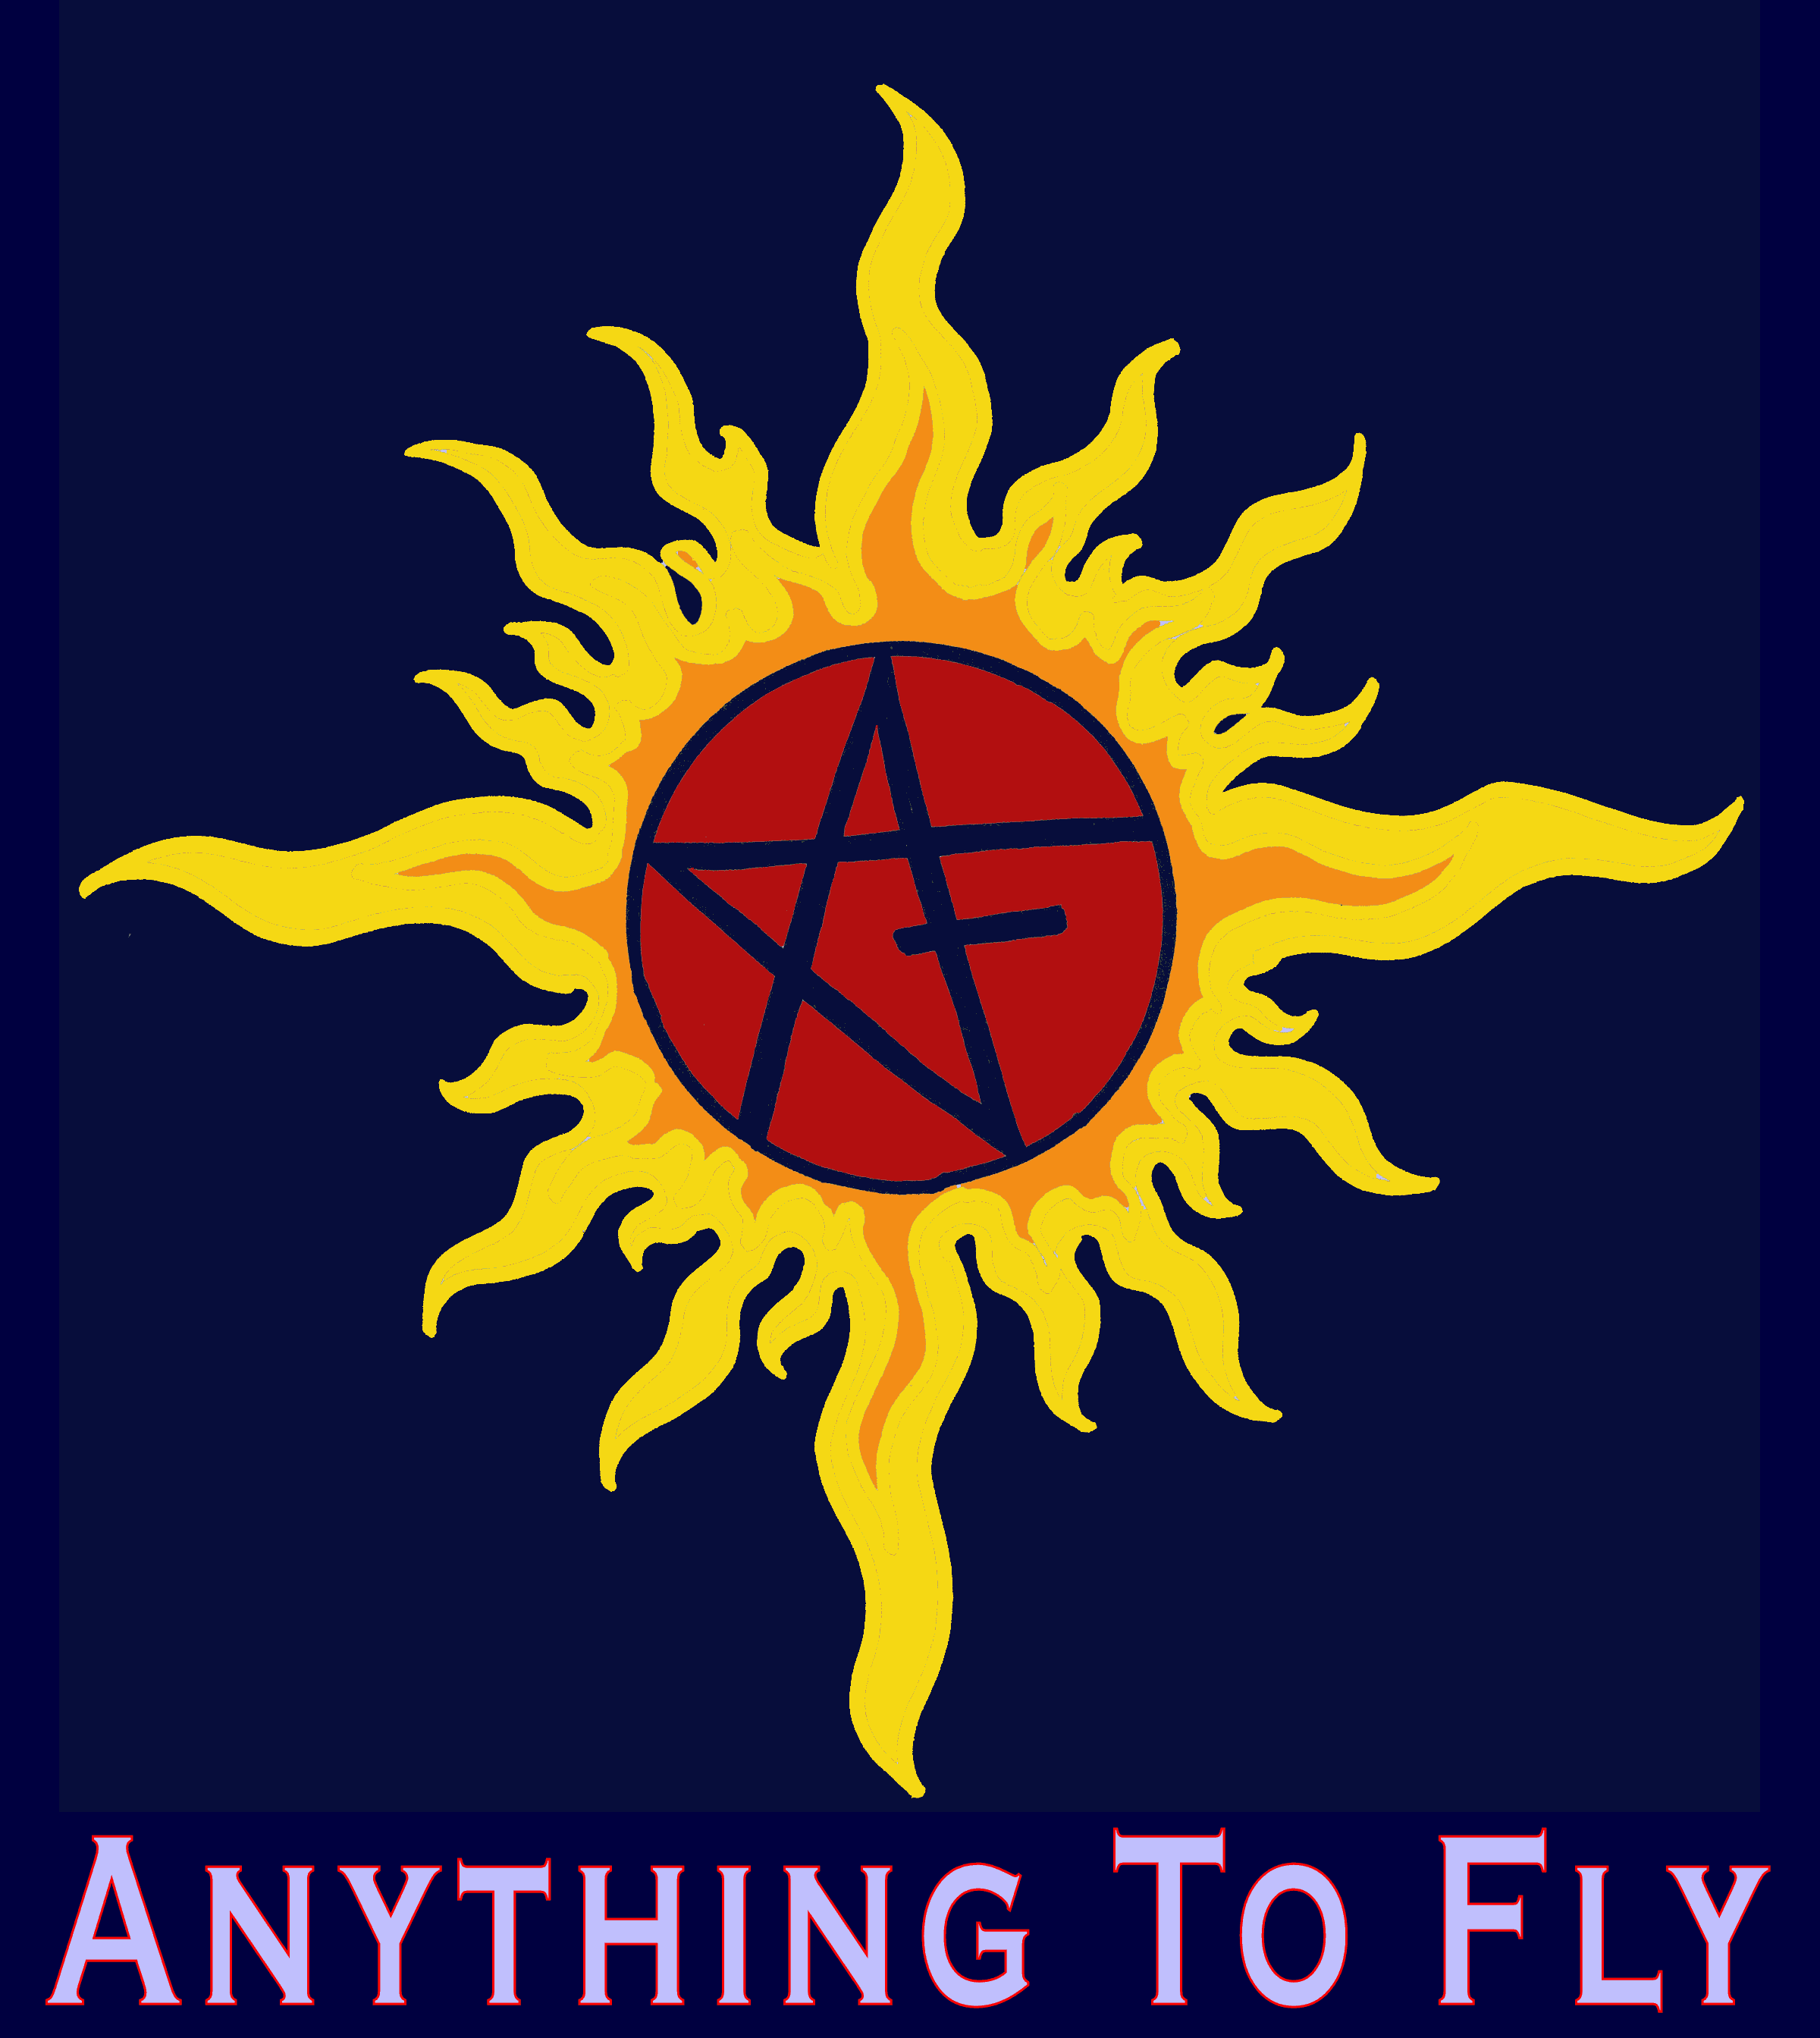 Anything To Fly's logo